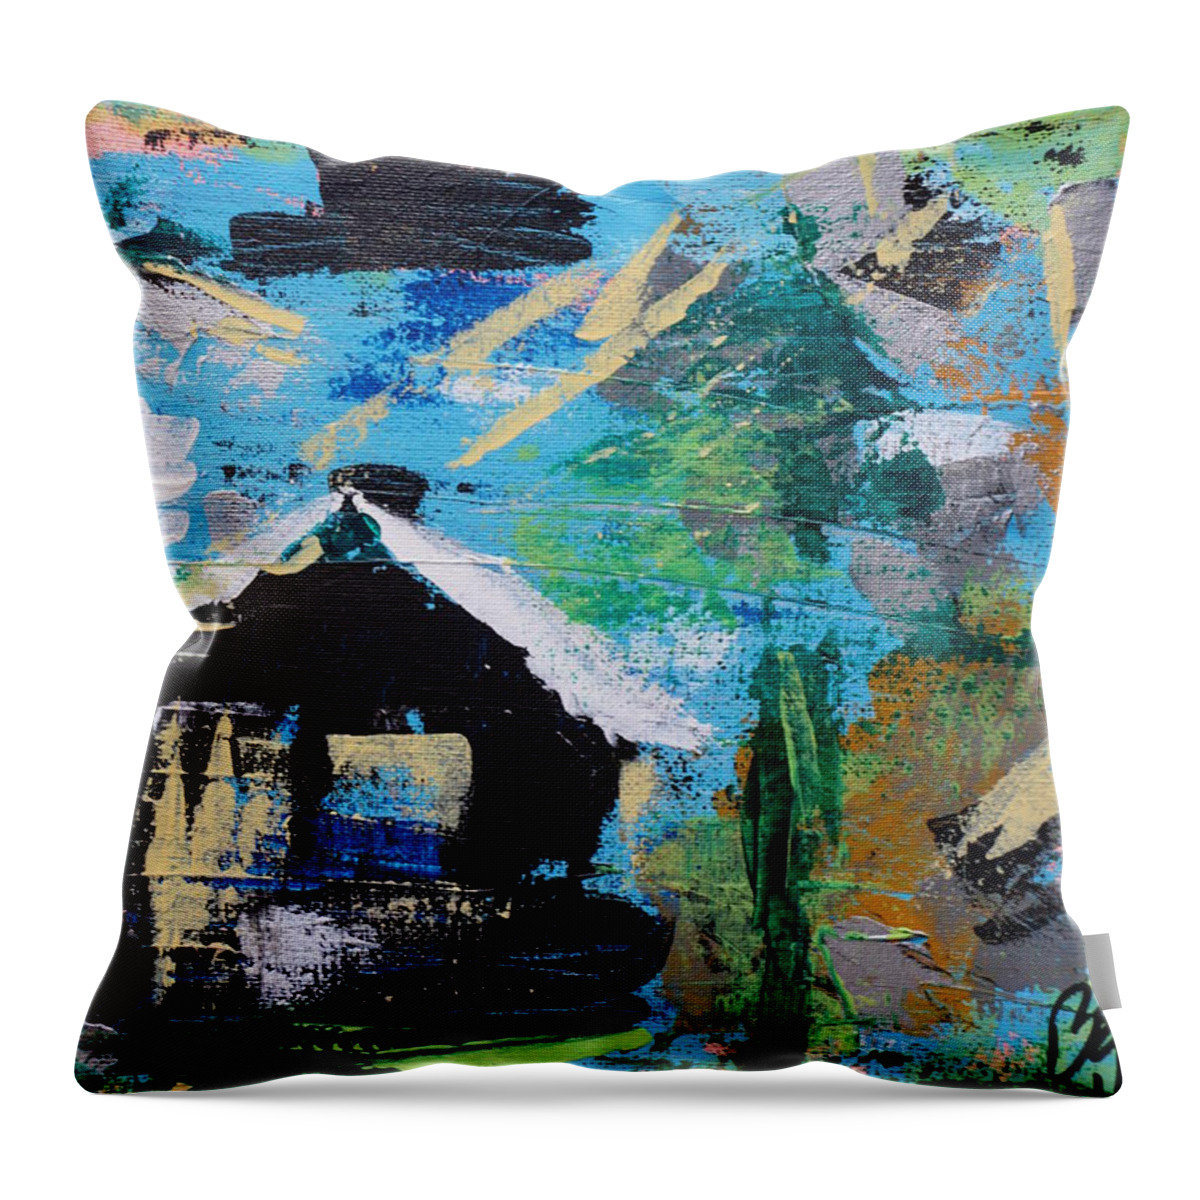 Cabin Throw Pillow featuring the painting Cabin In The Woods by Brent Knippel